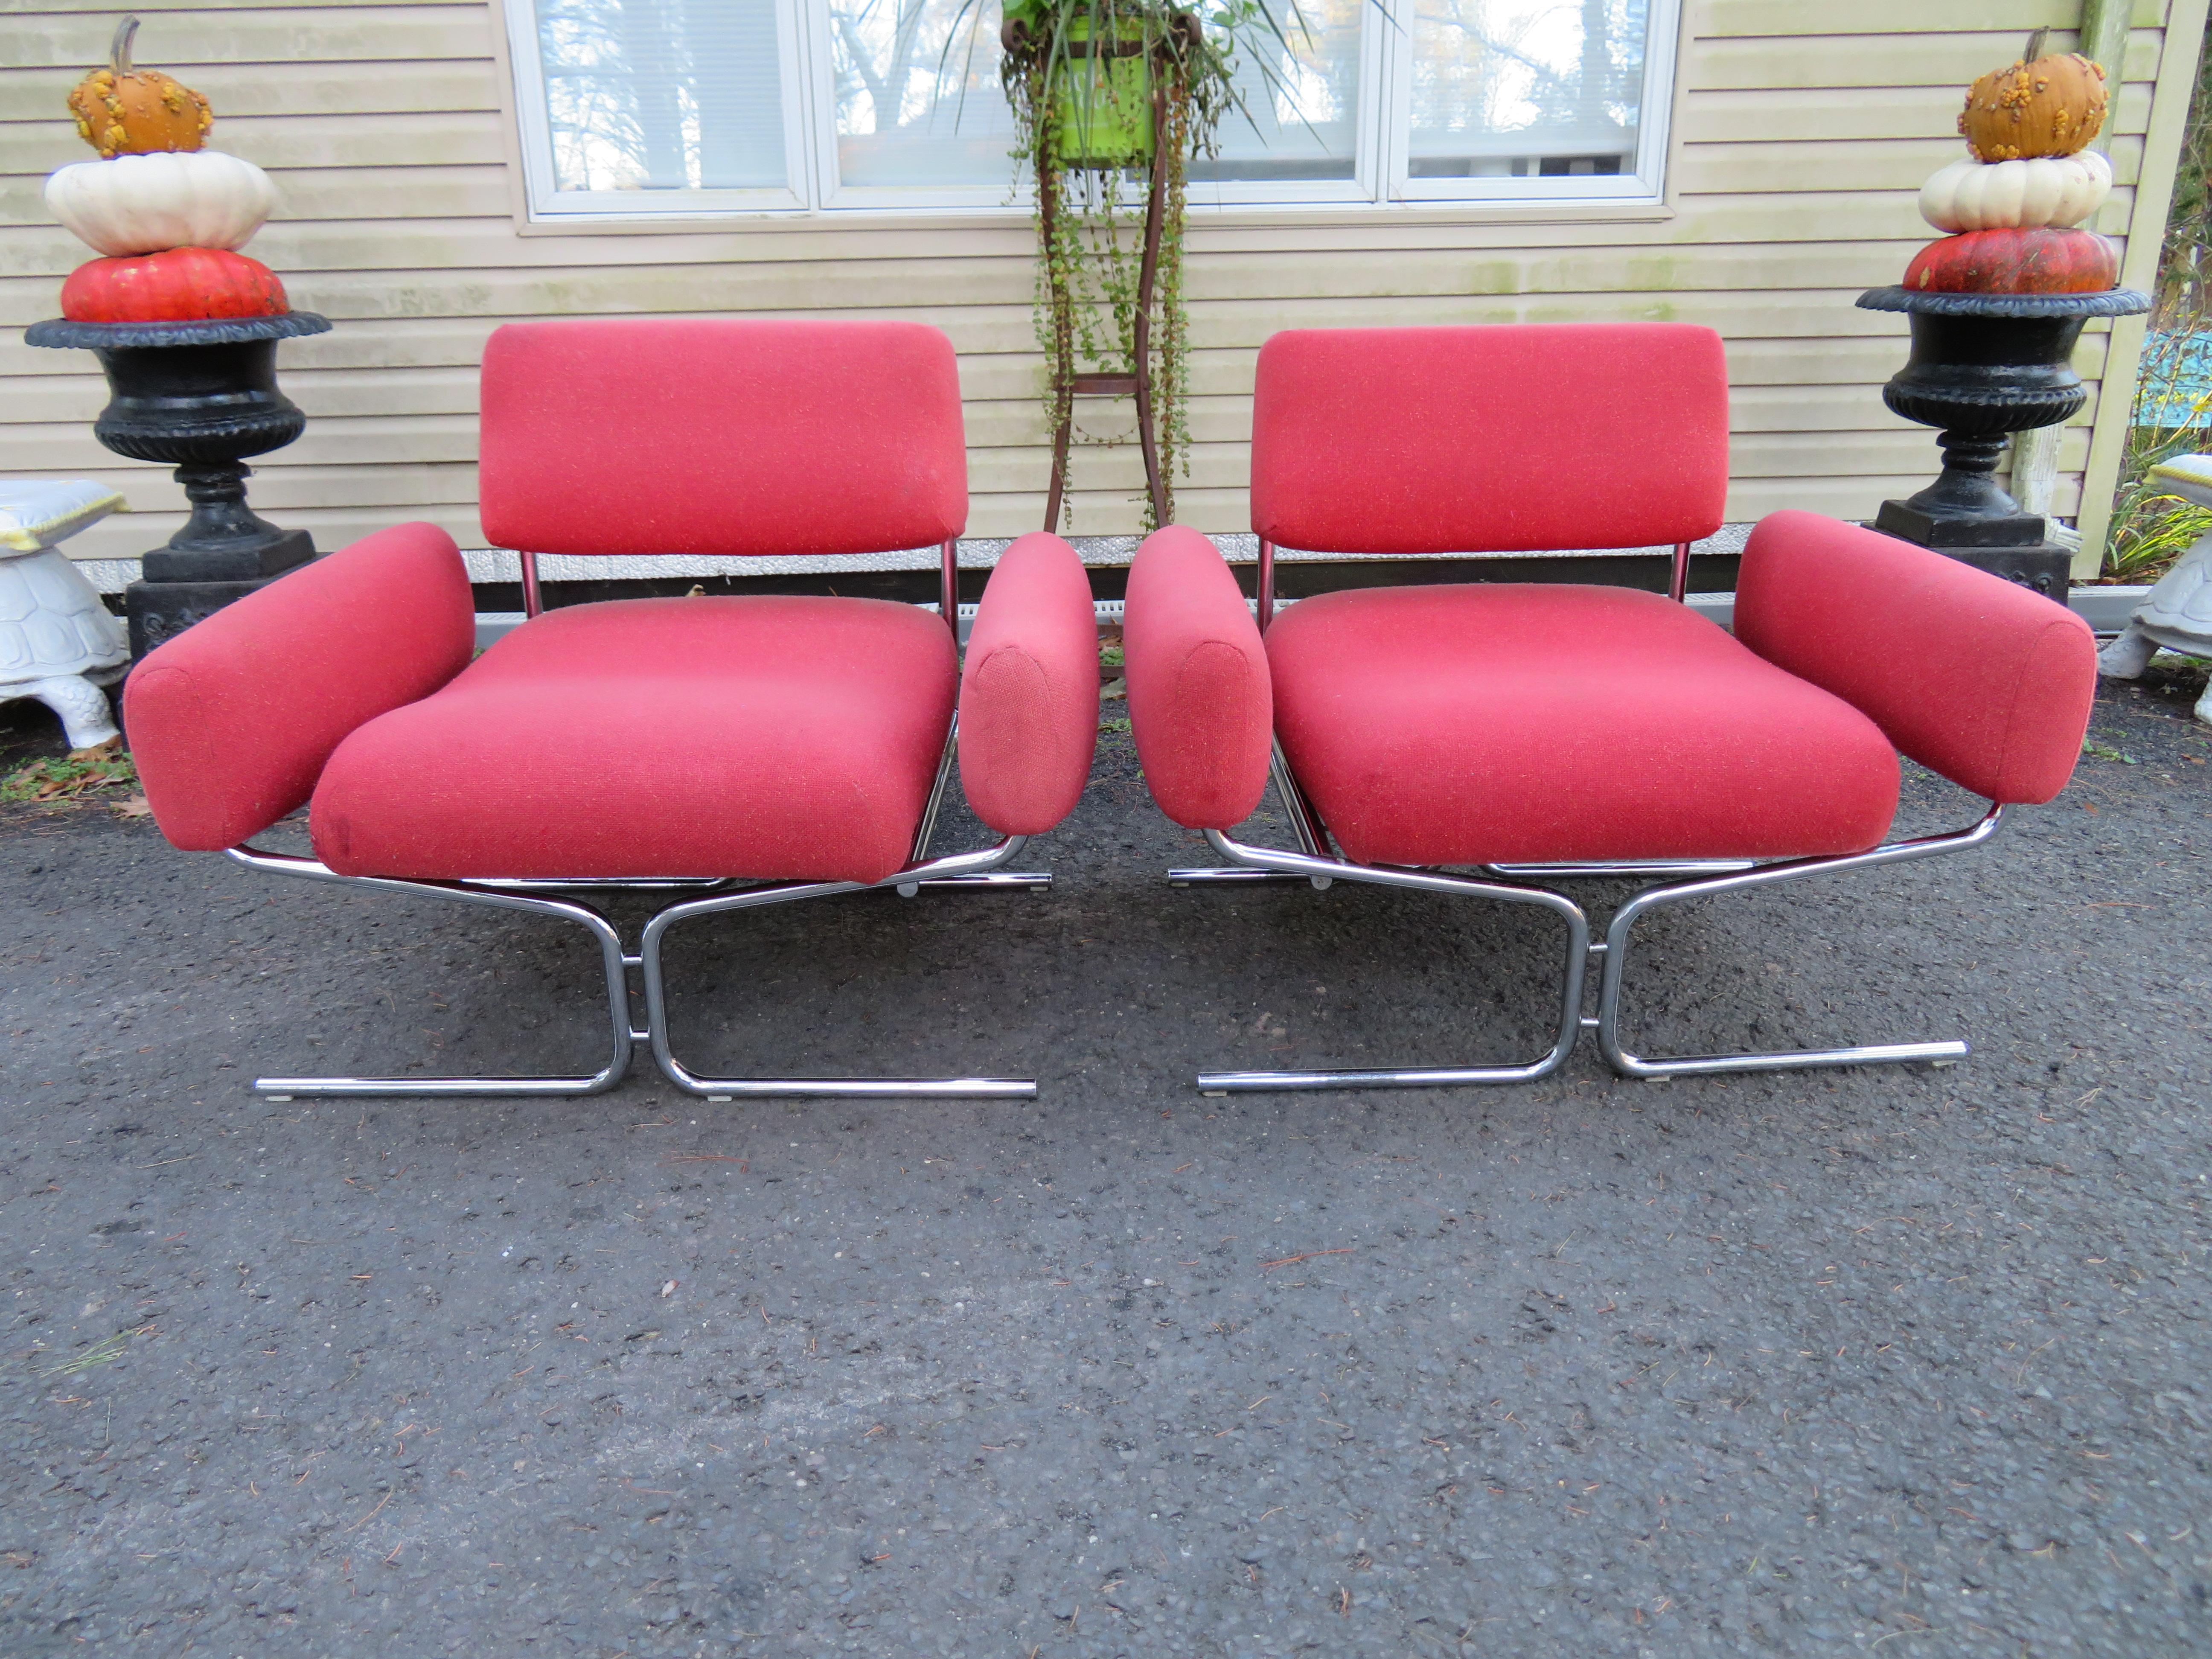 Magnificent Pair of Space-Age Tubular Chrome Lounge Chairs Ingmar Relling Style 9